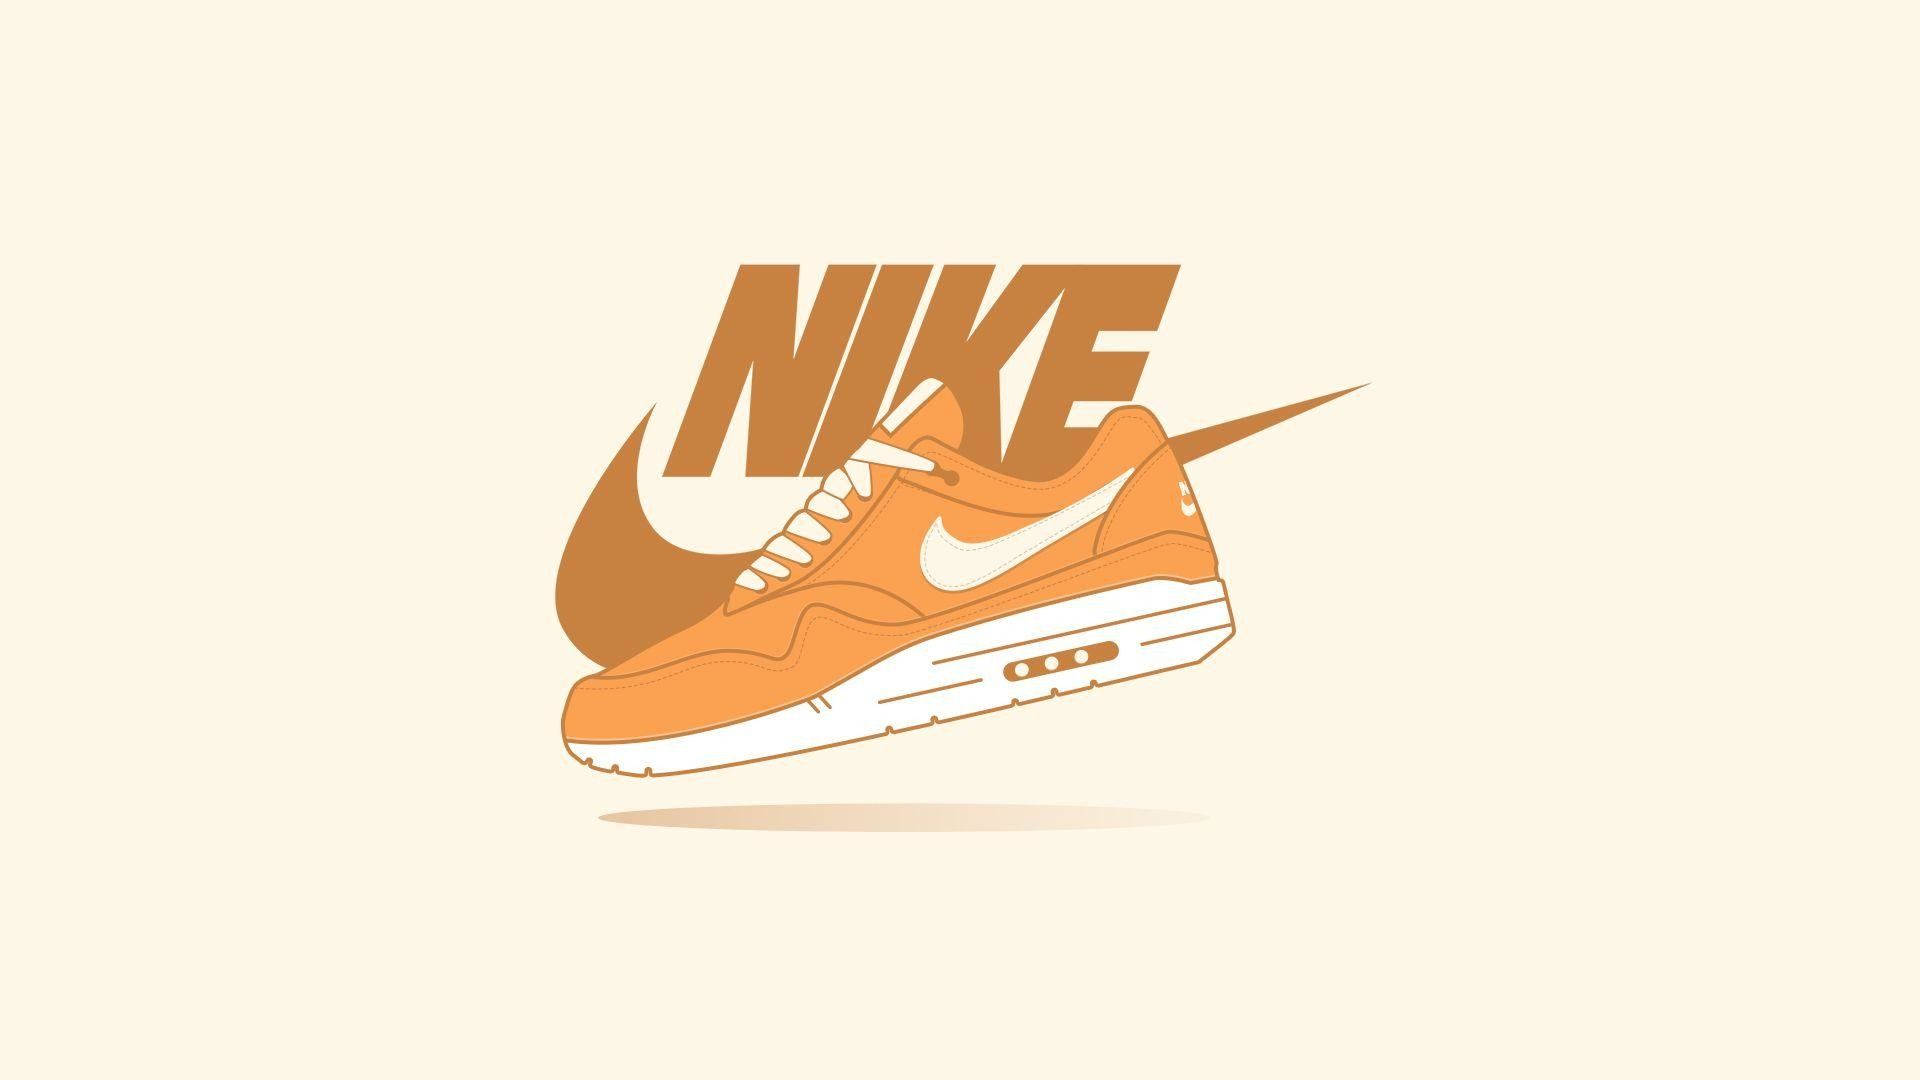 Top 999+ Nike Shoes Wallpaper Full HD, 4K Free to Use